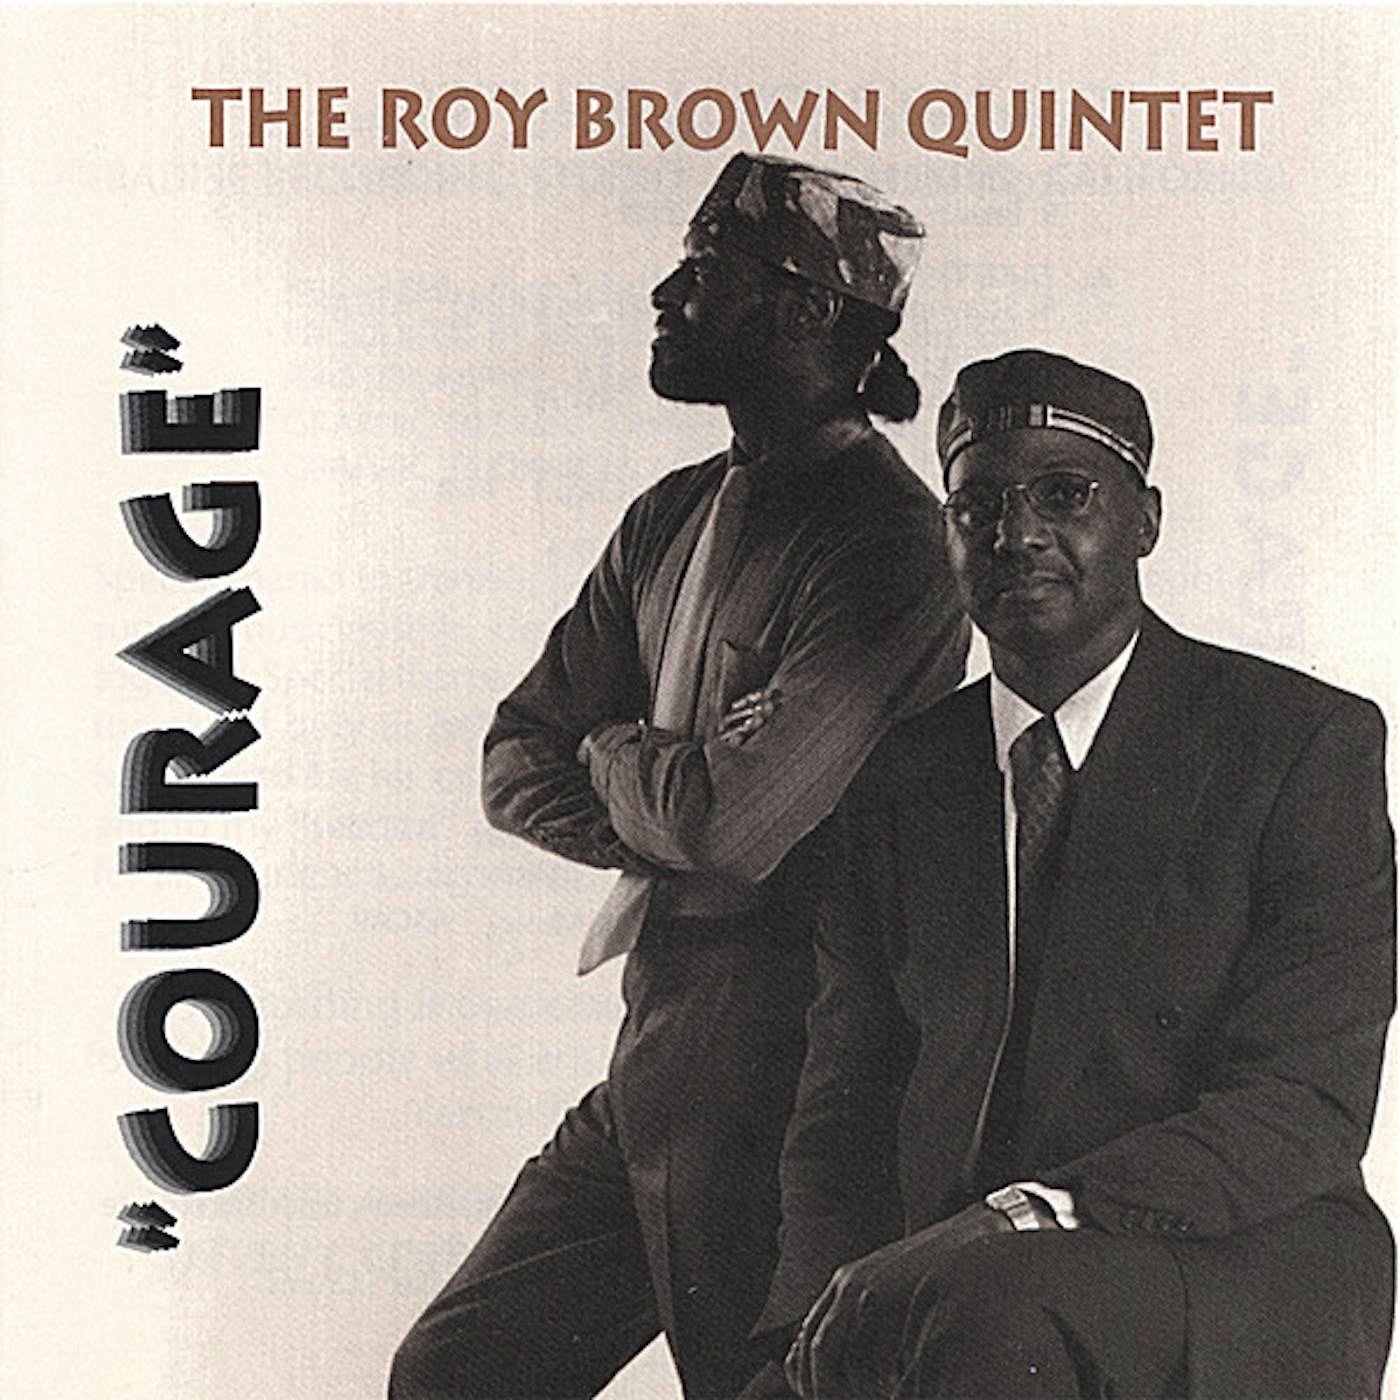 Roy Brown COURAGE CD